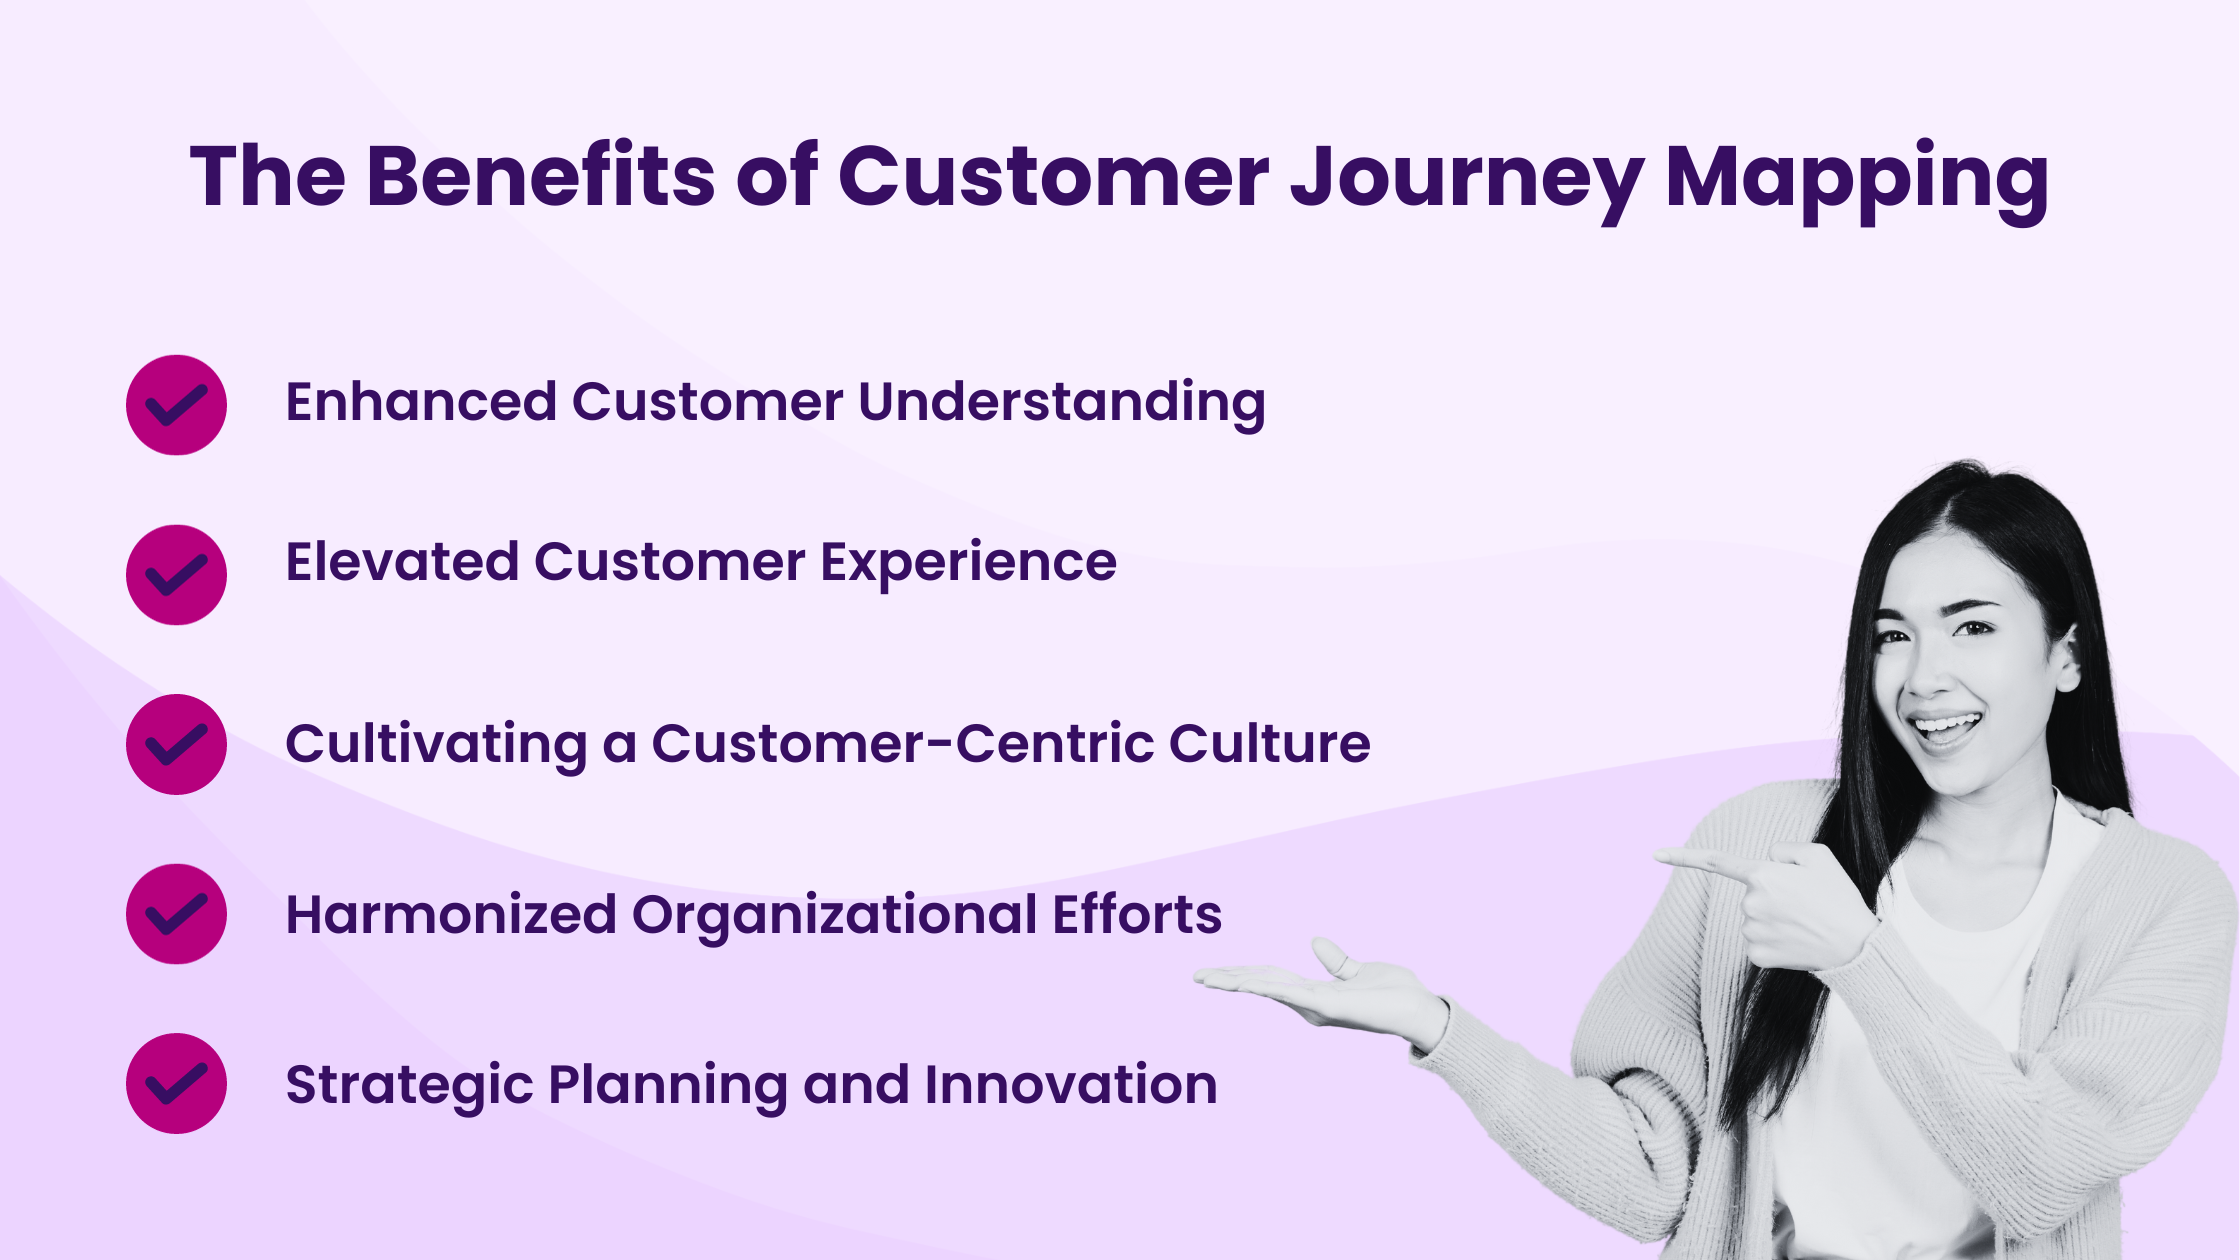 The Benefits of Customer Journey Mapping